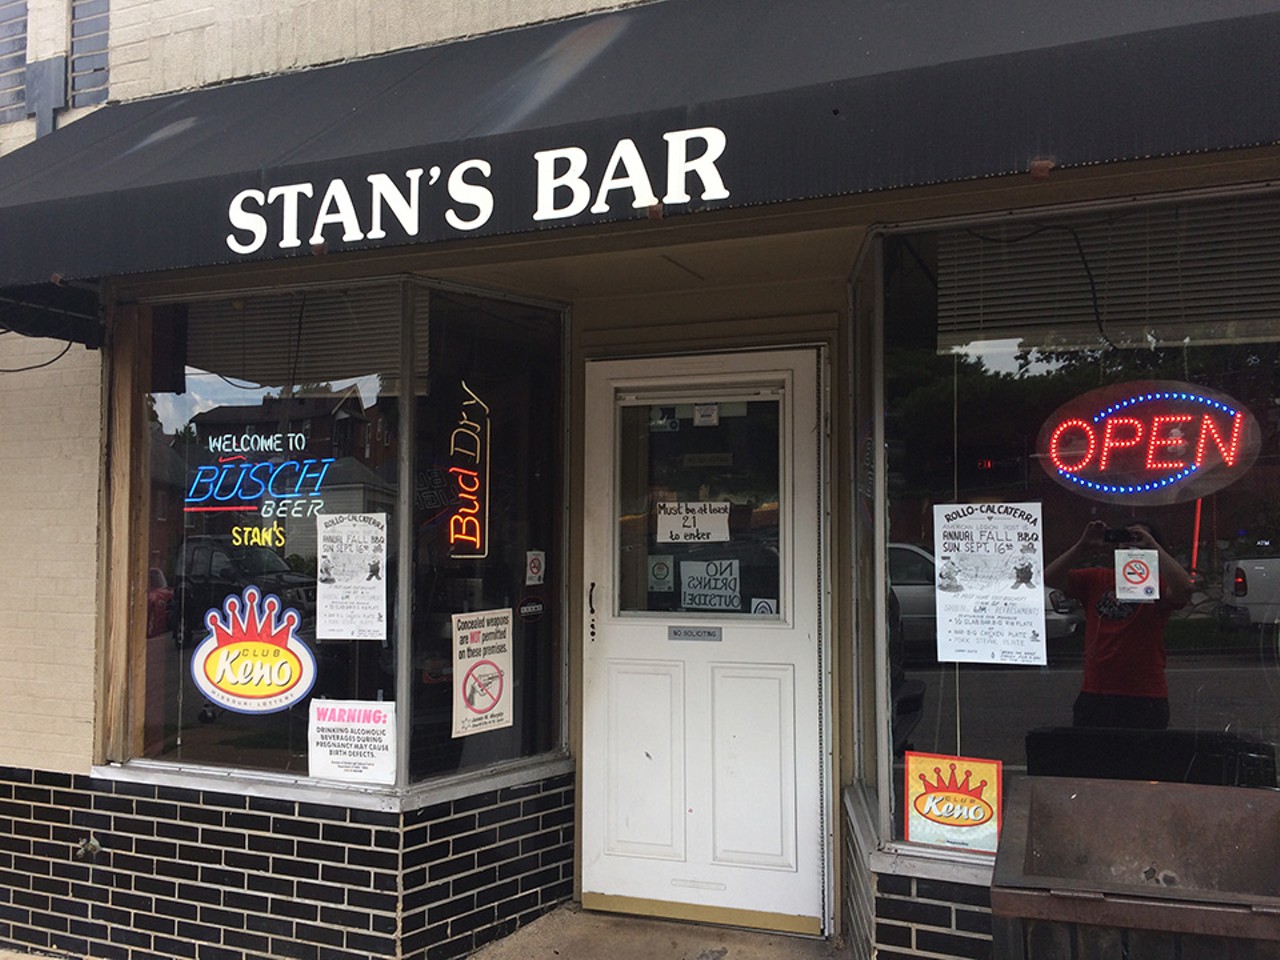 Stan's Bar
Sure, you could sit around your house in the early-morning hours watching the Game Show Network on the couch while putting back endless whiskey-and-cokes &#151; but that would get kind of lonely, wouldn&#146;t it? No worries, just head to Stan&#146;s Bar (5007 Macklind Avenue, 314-481-9990). The Southampton watering hole boasts several TVs behind the bar, often employed to provide your daily Family Feud fix. In keeping with the dive-bar vibe, the prices are cheap and the locals are friendly, and with three pool tables and two dart boards, you just may find yourself a participant in some games rather than just a spectator. Stan&#146;s Bar is open Monday through Saturday from 8 a.m. to 1:30 a.m. and Sunday from 10 a.m. to midnight.
Photo courtesy of Daniel Hill